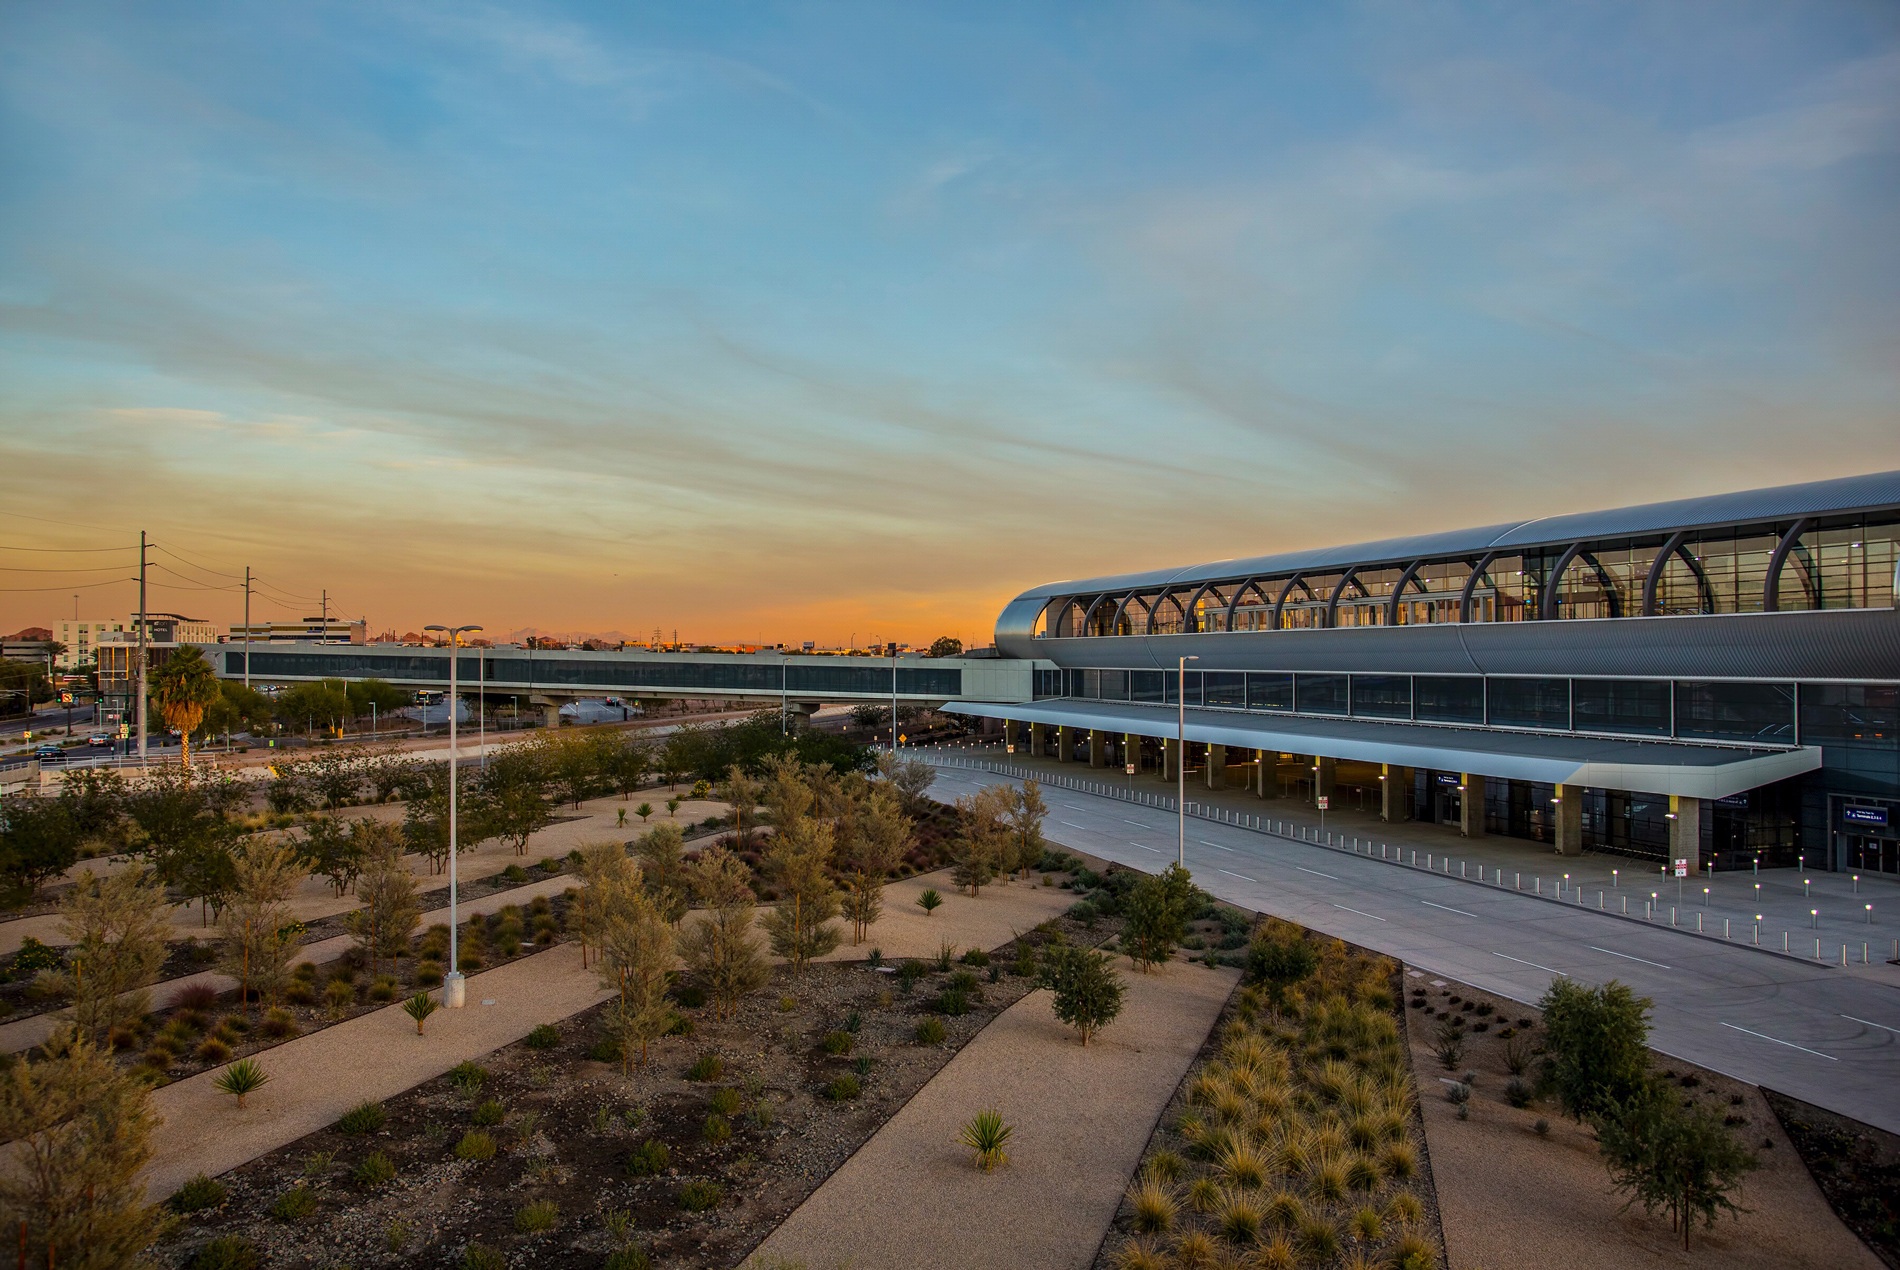 HOK previously designed the 44th Street and Terminal 4 PHX Sky Train stations for the PHX Sky Train